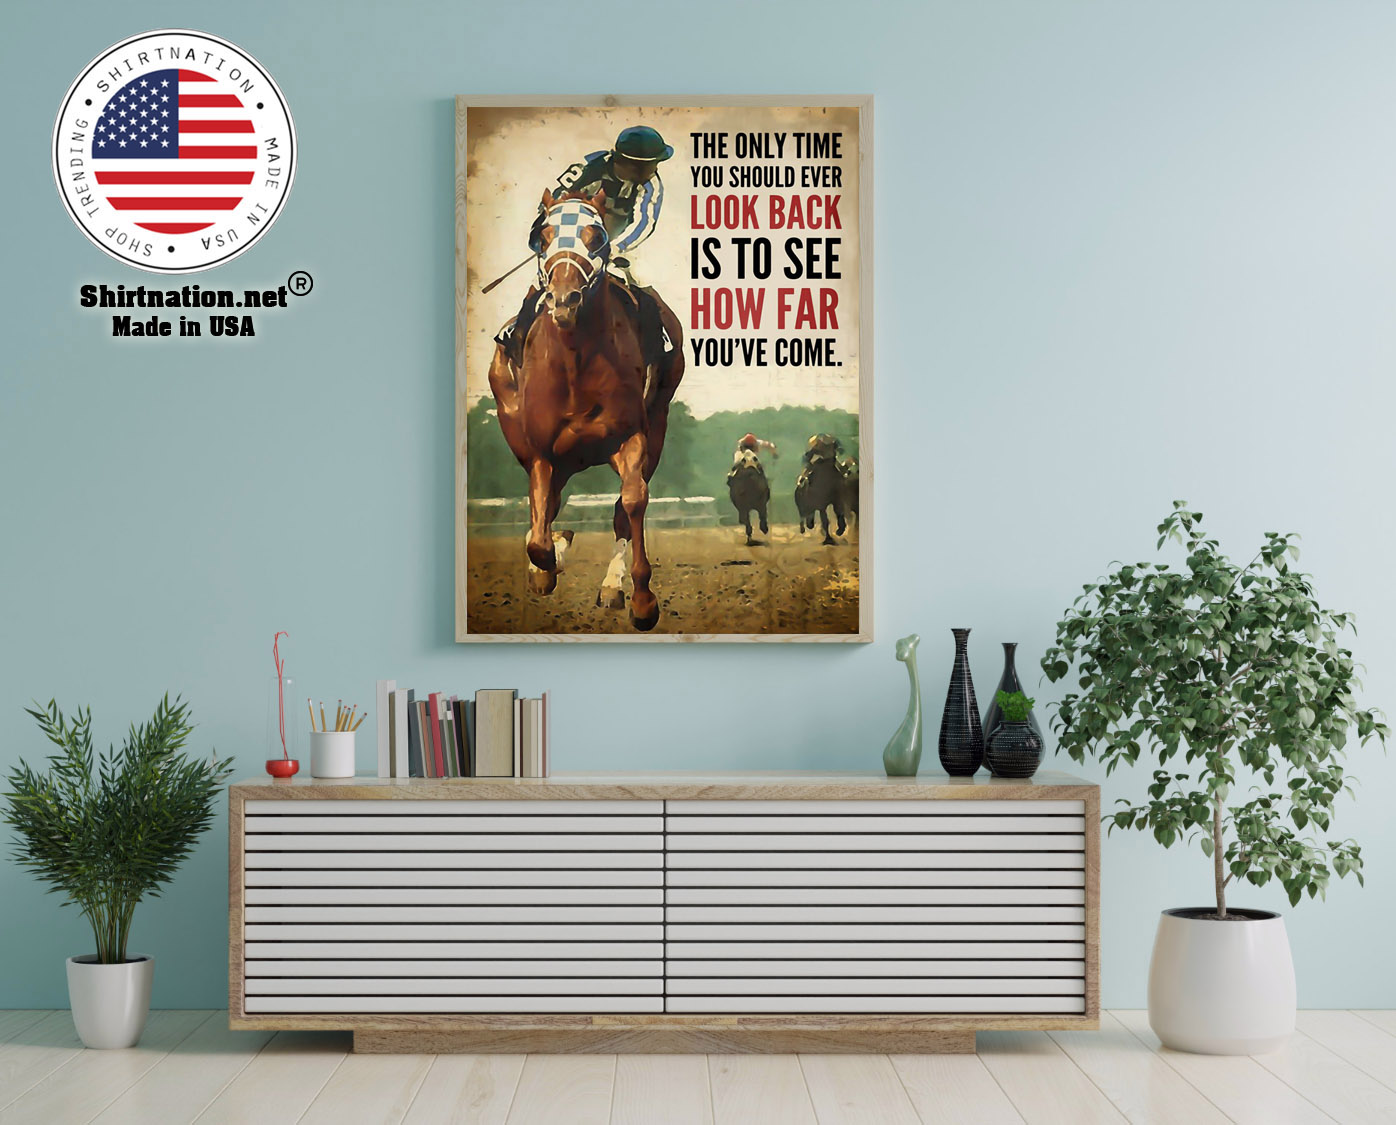 Racing horse The only time you should ever look back is to see how far youve come poster 16